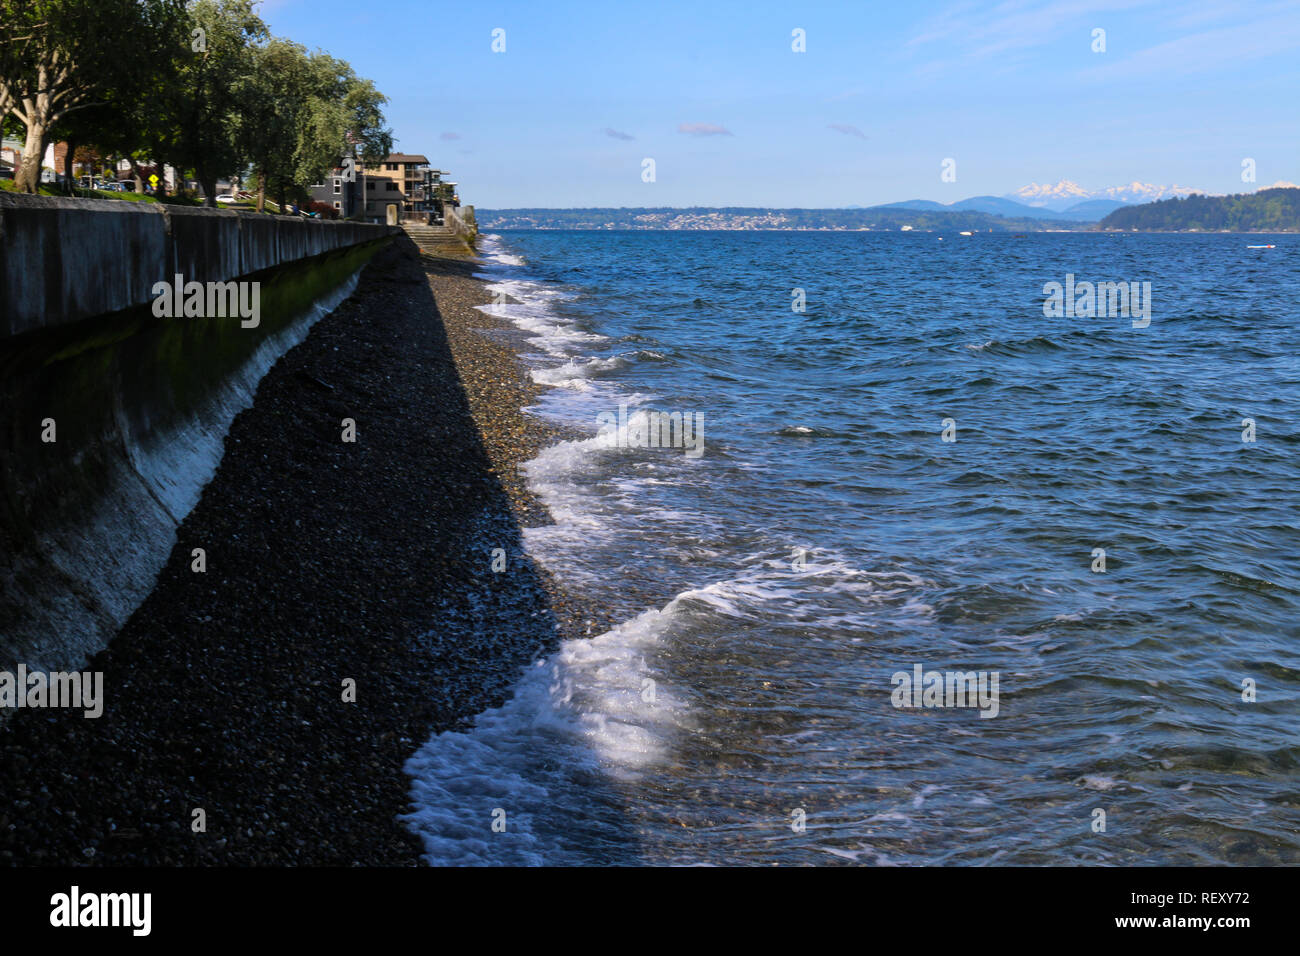 Sea wall at Alki Beach in West Seattle Washington with view of Cascade Mountains in the distance on a sunny day with clear blue sky Stock Photo